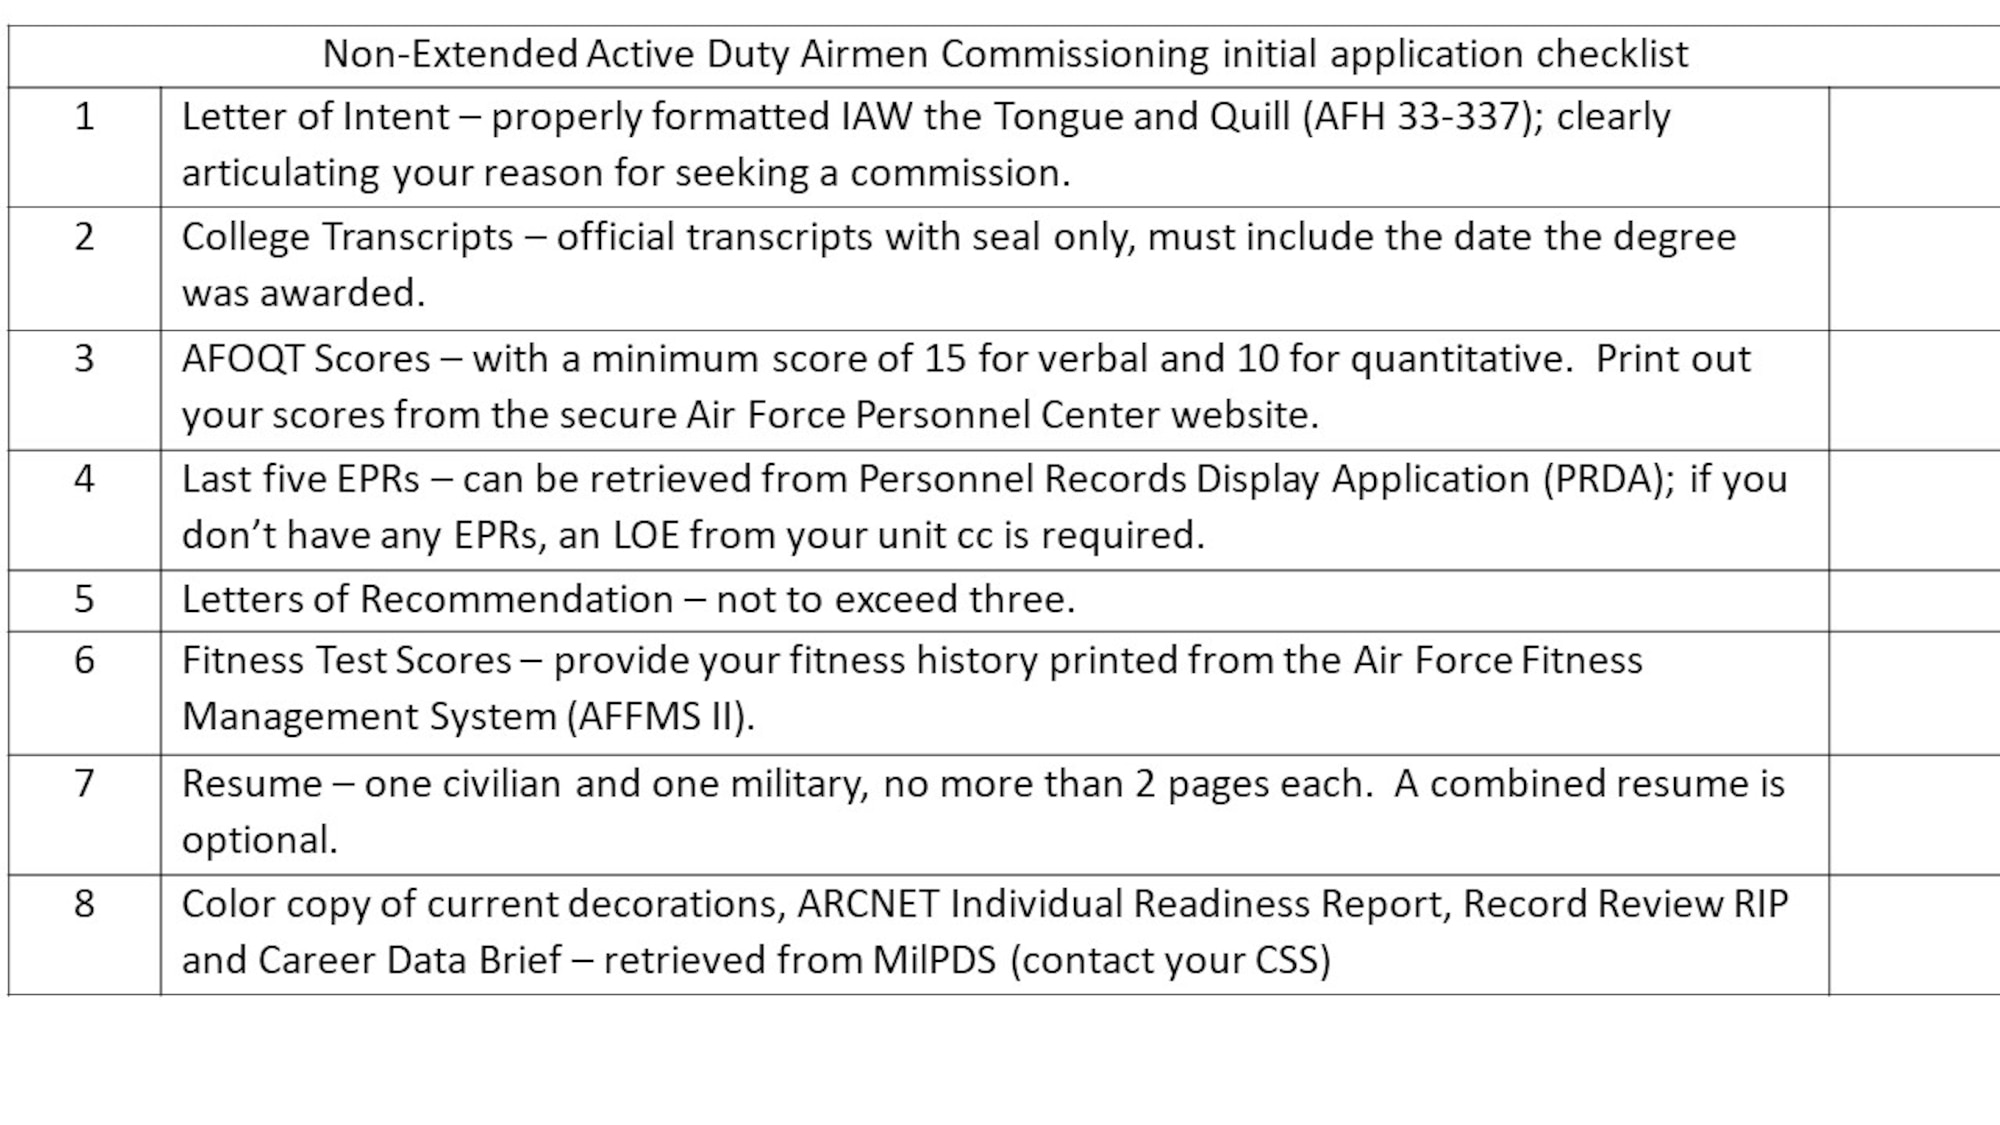 Non-Extended Active Duty Airmen Commissioning Program checklist